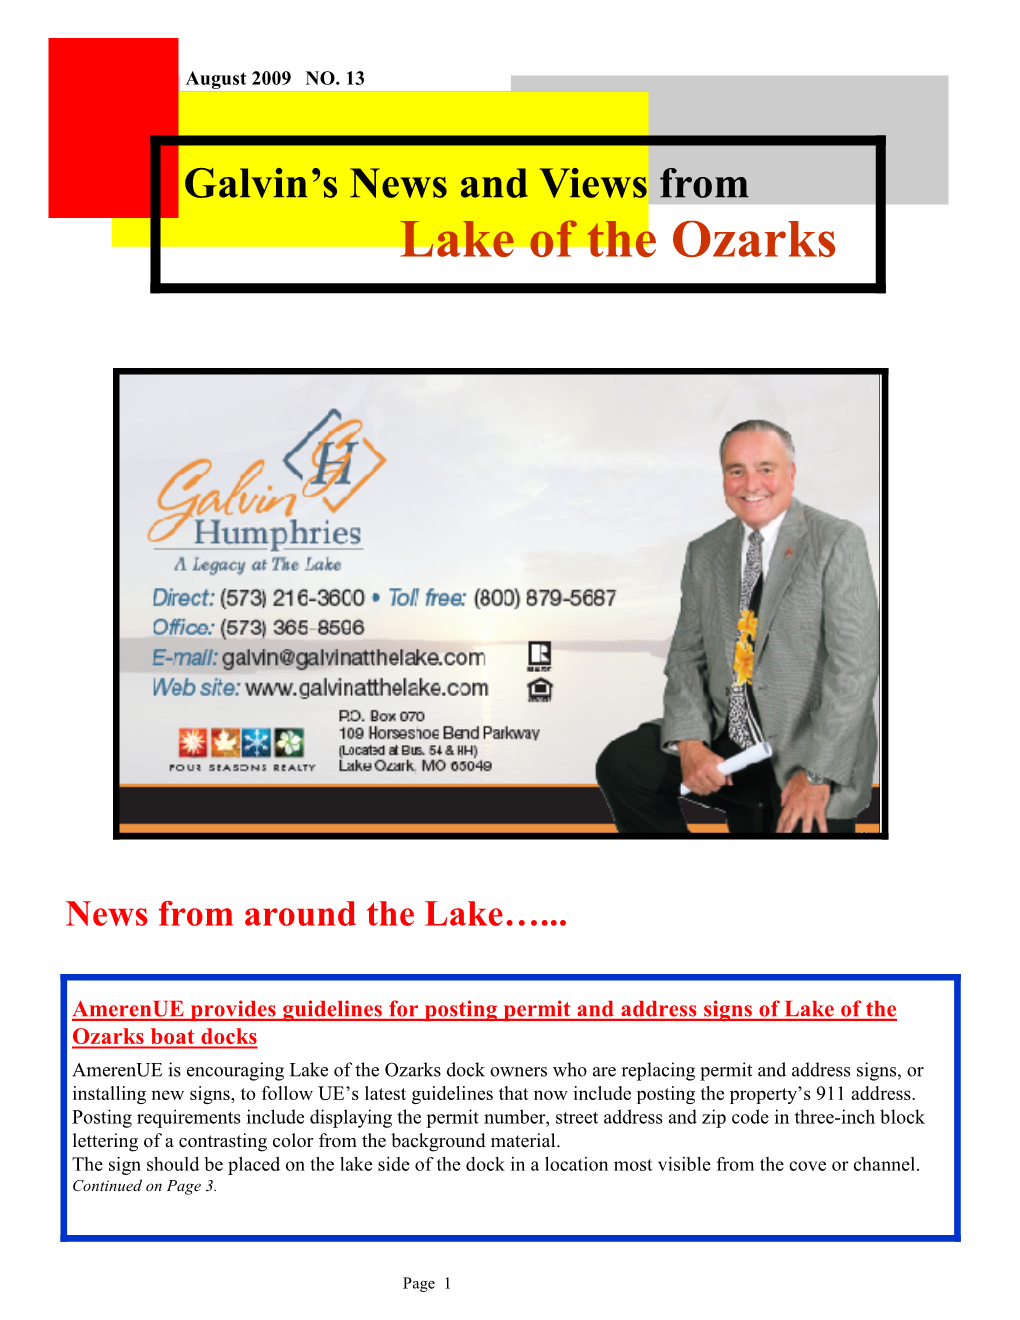 Galvin's News and Views from Lake of the Ozarks